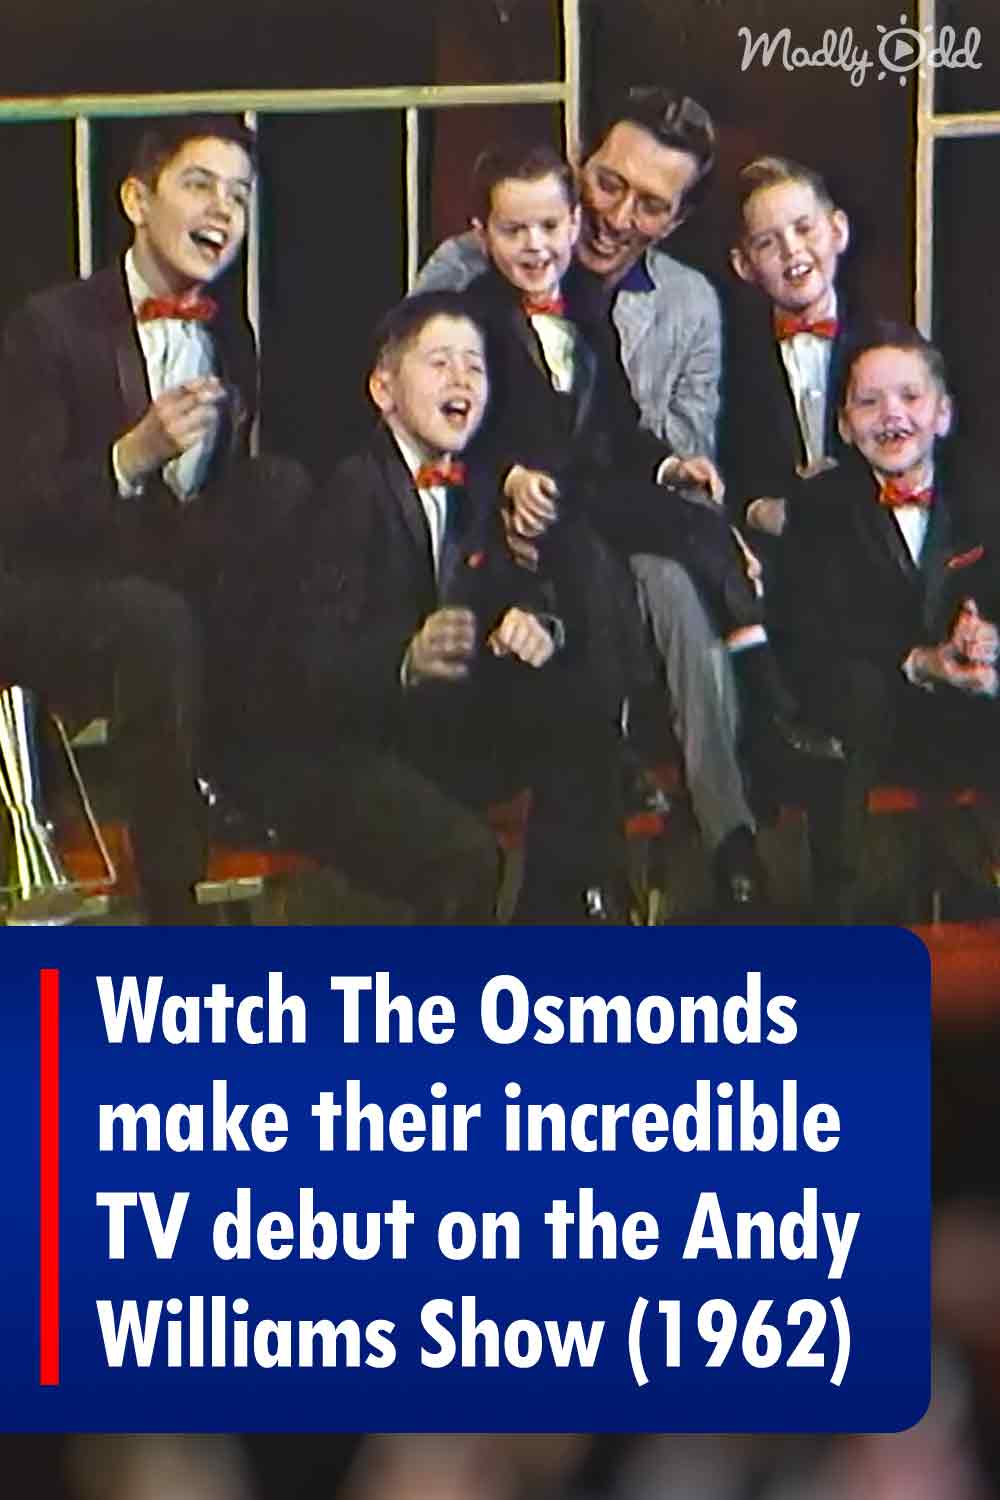 Watch The Osmonds make their incredible TV debut on the Andy Williams Show (1962)